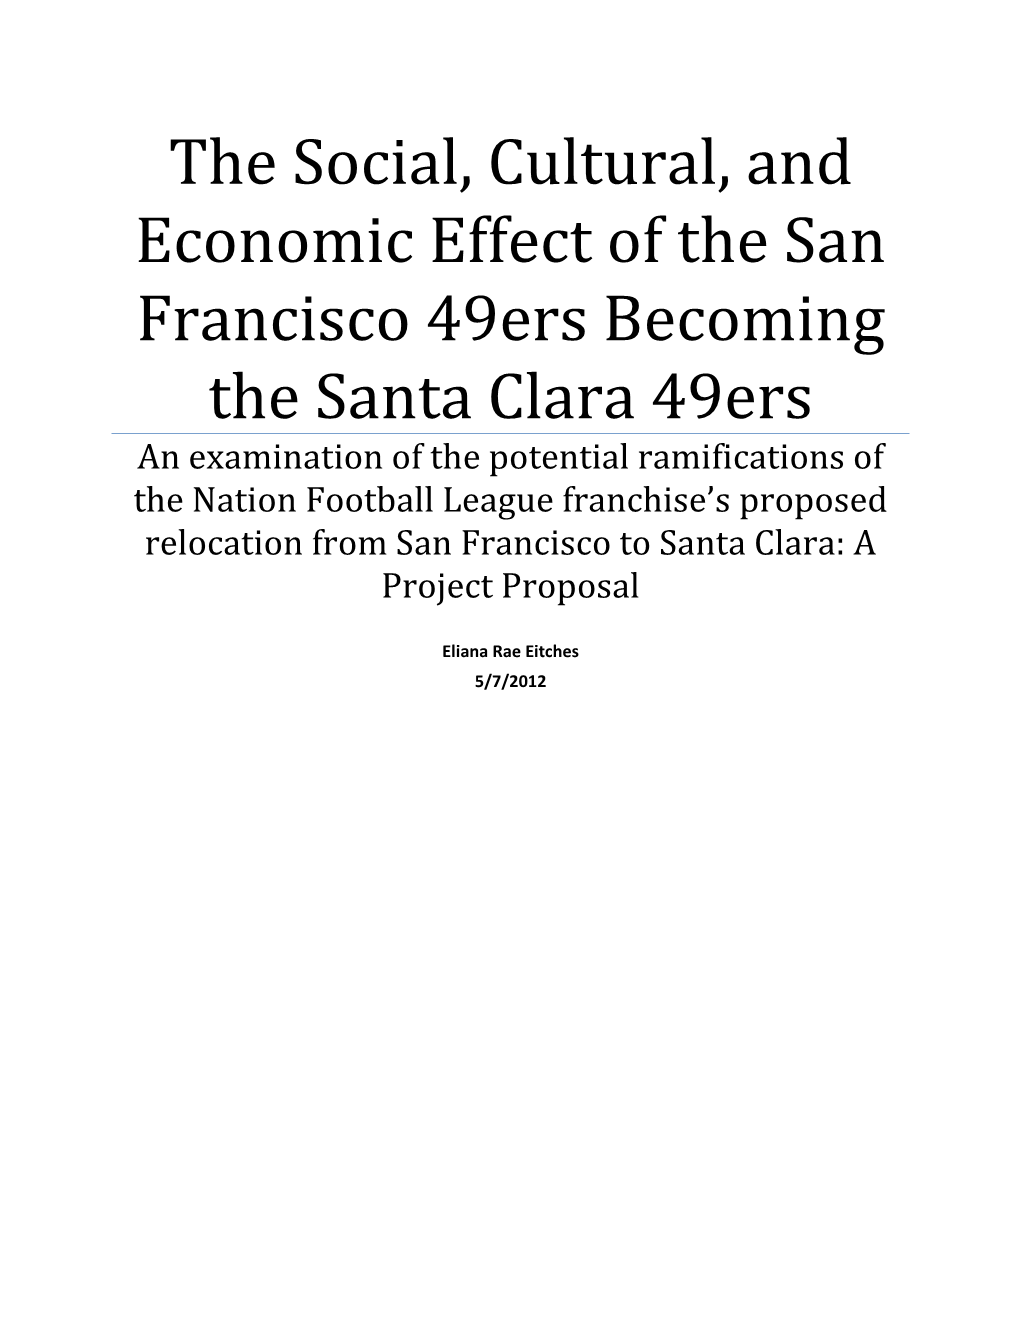 The Social, Cultural, and Economic Effect of the San Francisco 49Ers